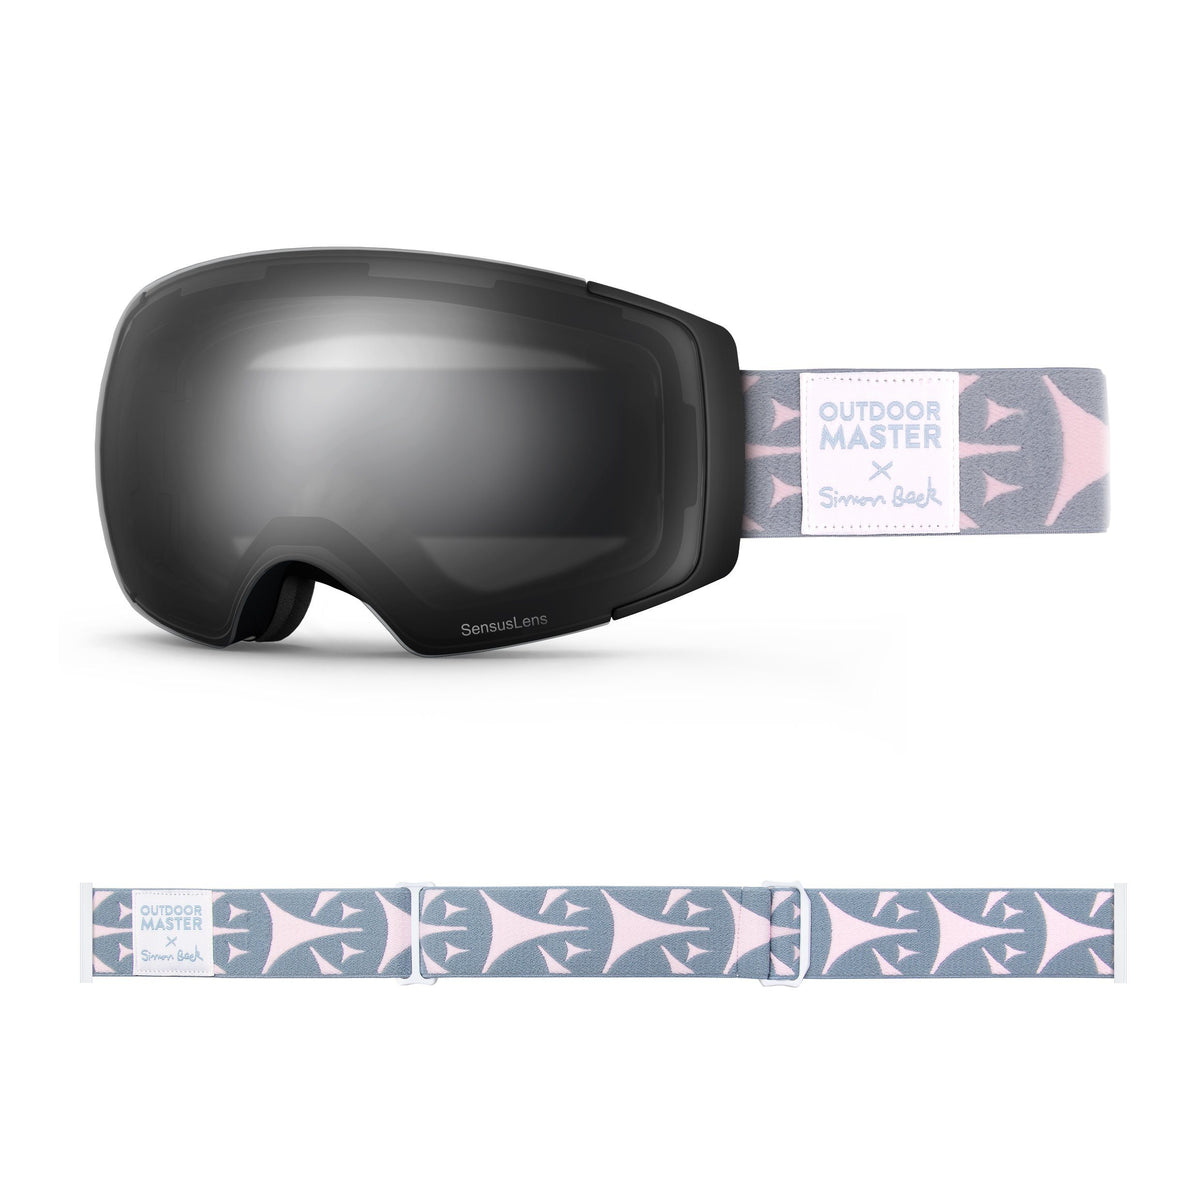 OutdoorMaster x Simon Beck Ski Goggles Pro Series - Snowshoeing Art Limited Edition OutdoorMaster SensusLens VLT 16-80% Photochromatic clear to Grey Bouncy Triangles